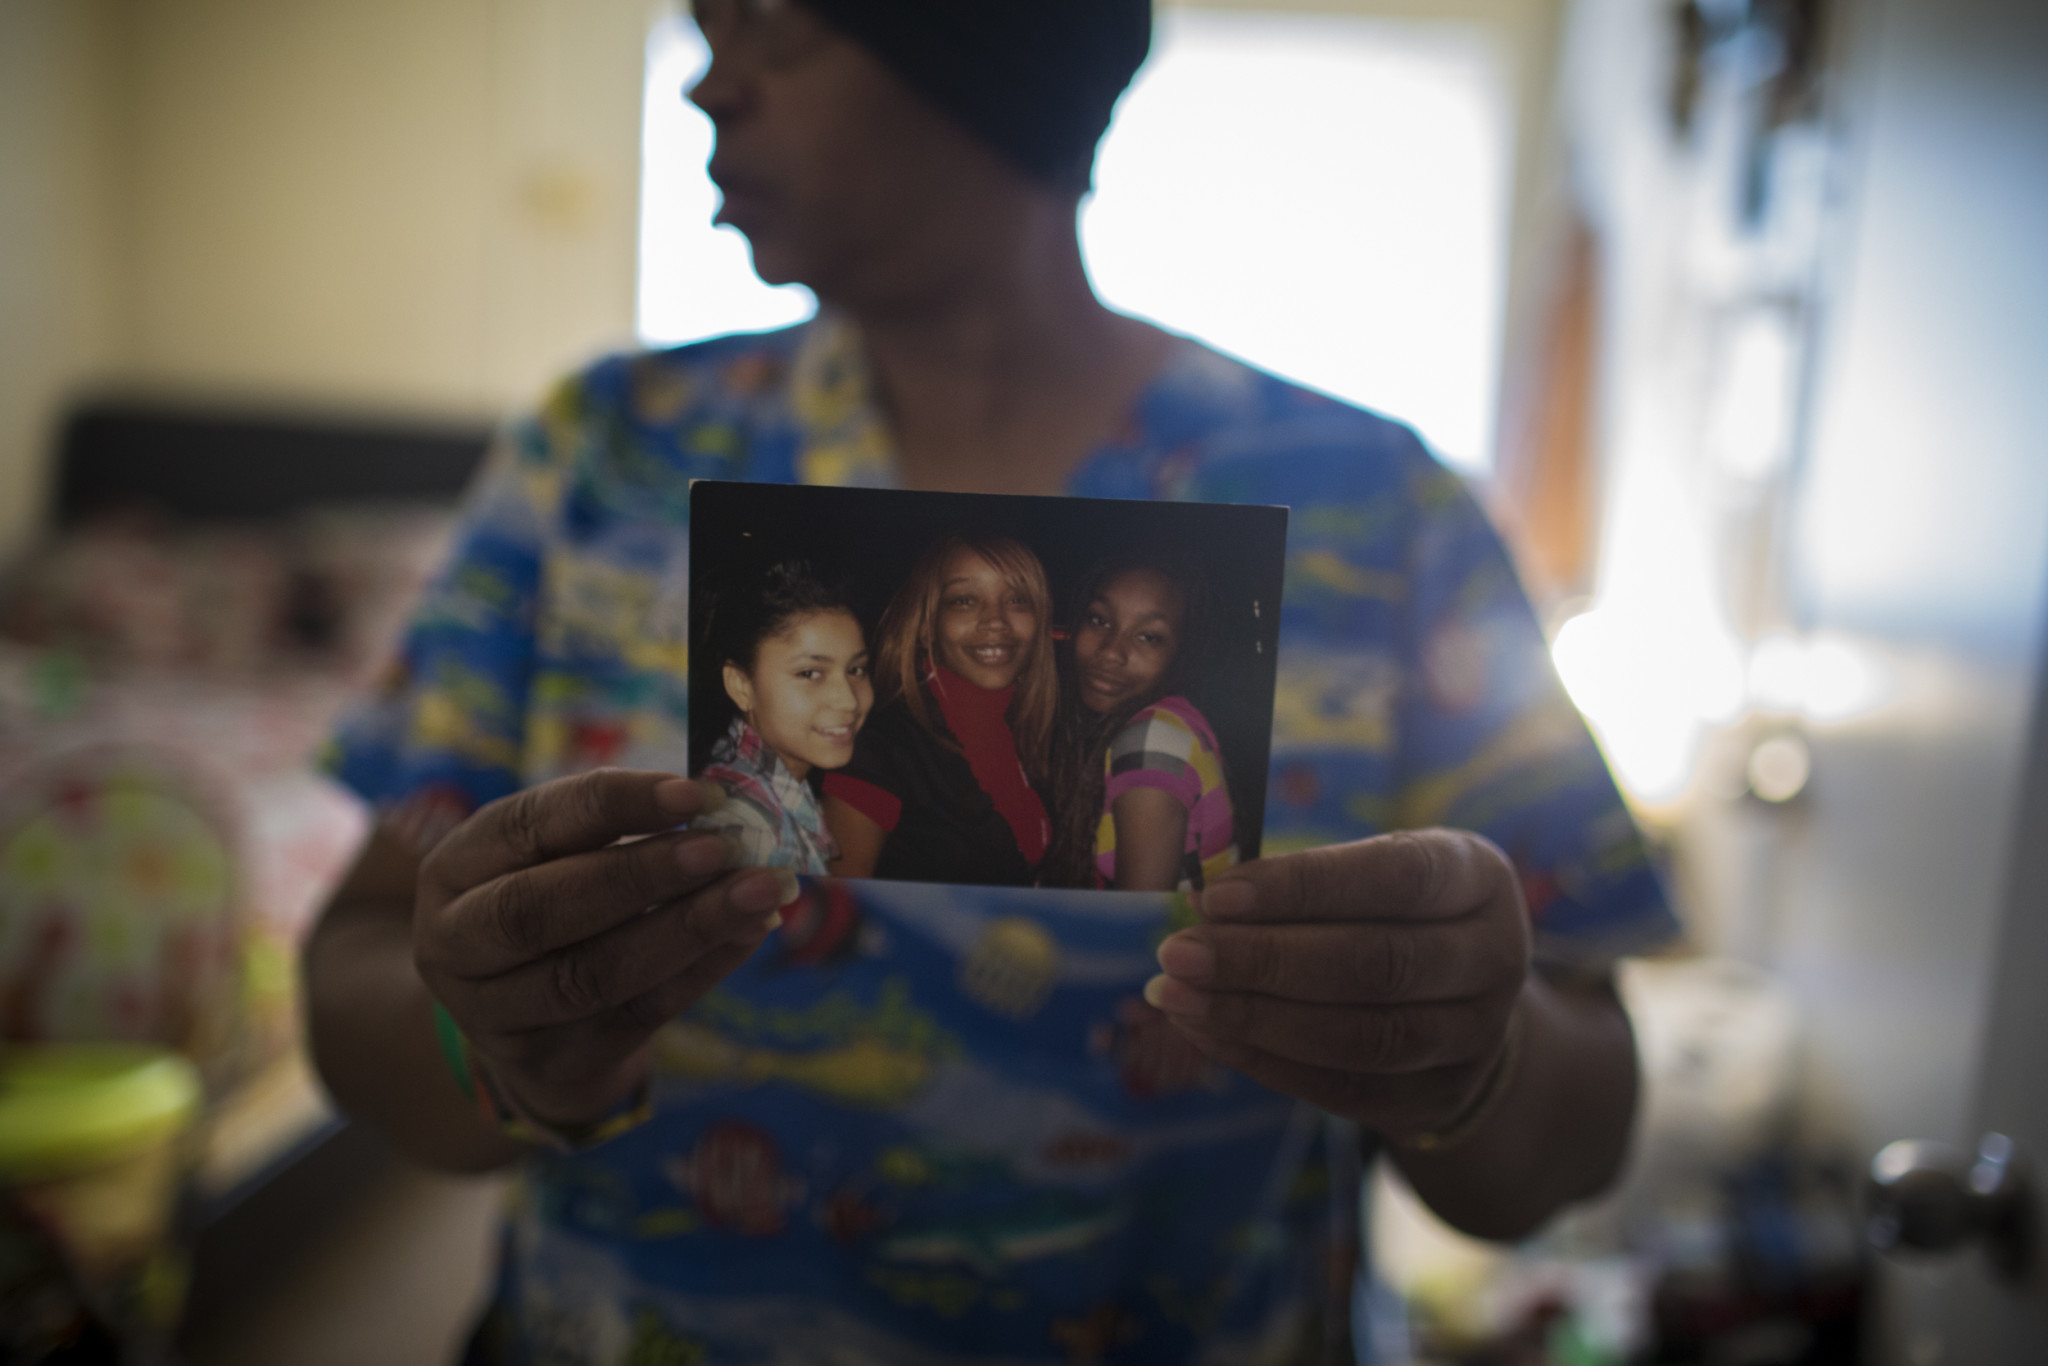 Tonya Kamara holds a photograph of her daughter April (in the middle), who is currently incarcerated at the Correctional Treatment Facility (CTF) in Washington, D.C., for drug-related offenses.